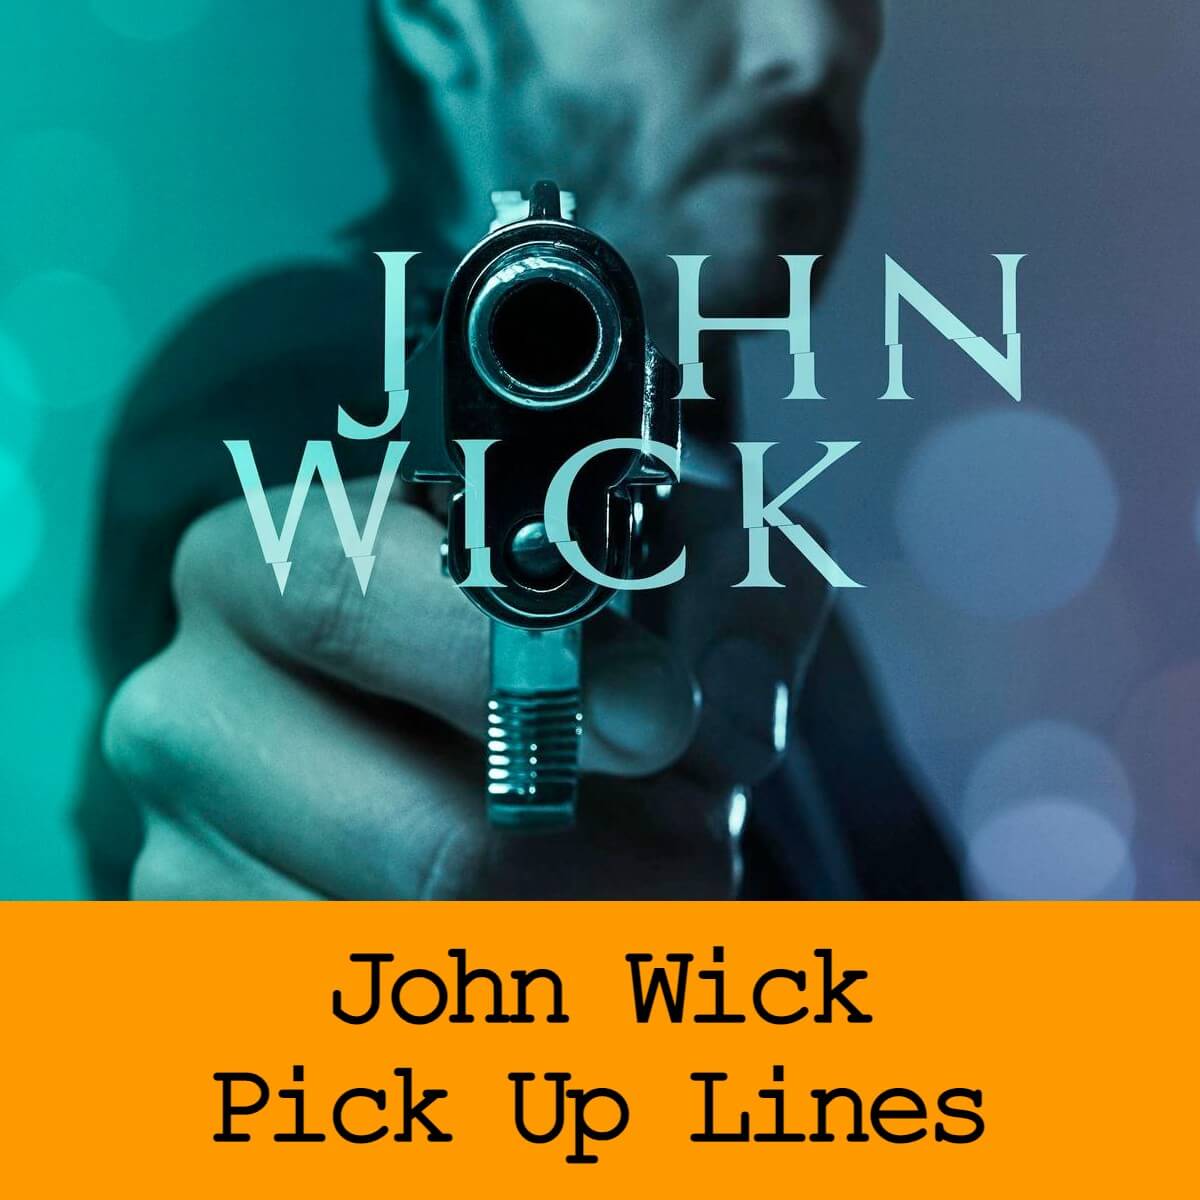 Pick Up Lines About John Wick